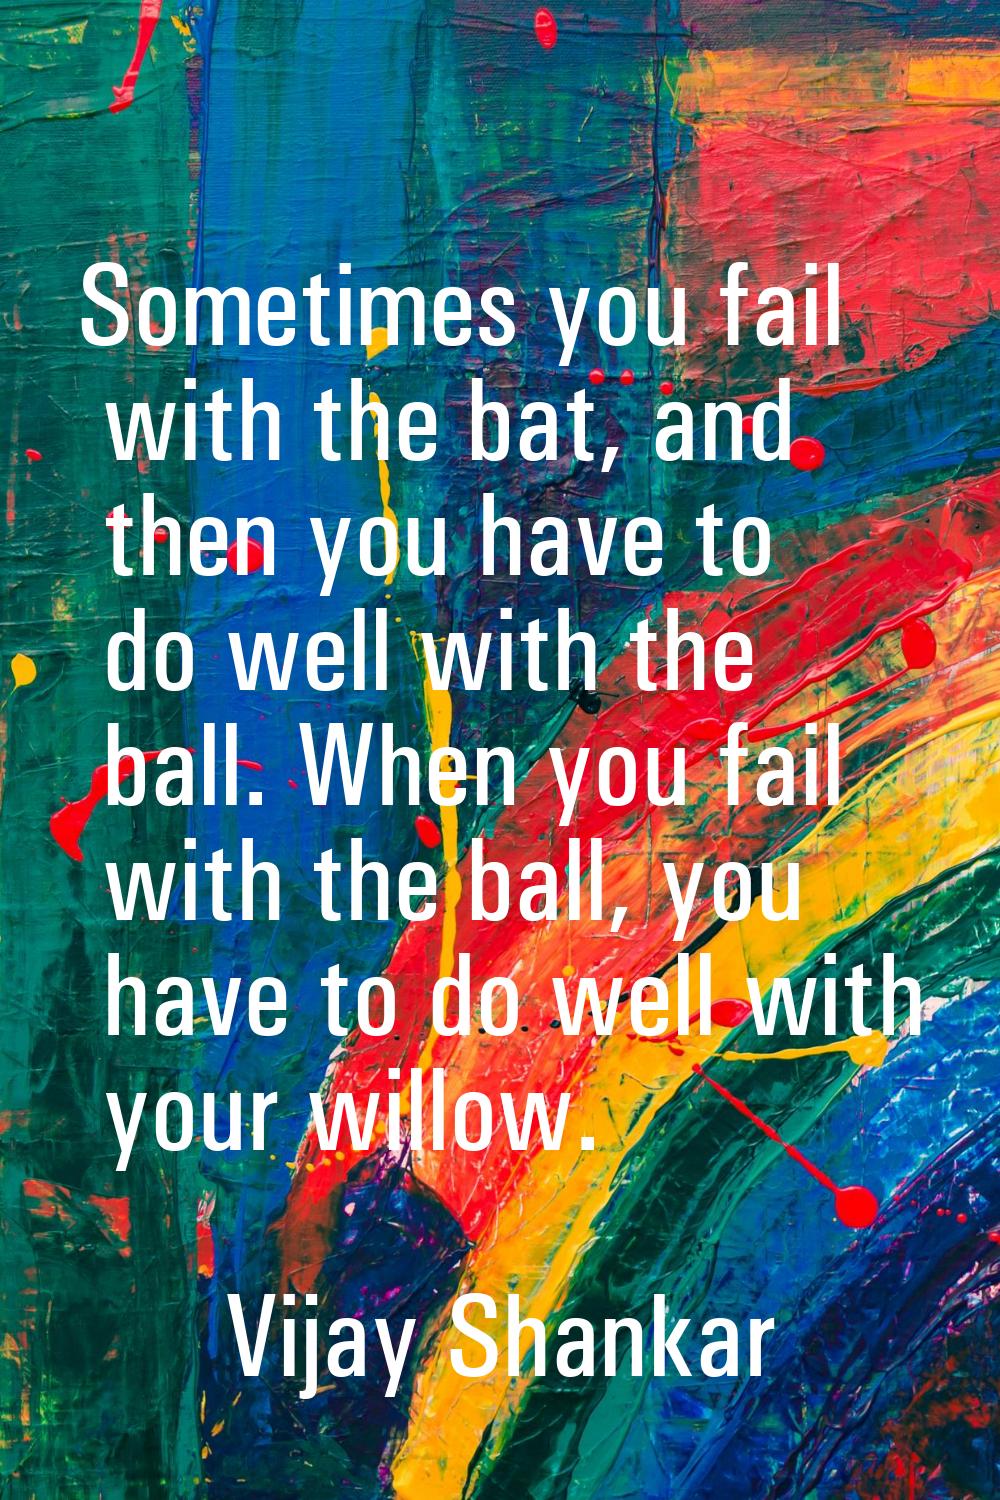 Sometimes you fail with the bat, and then you have to do well with the ball. When you fail with the